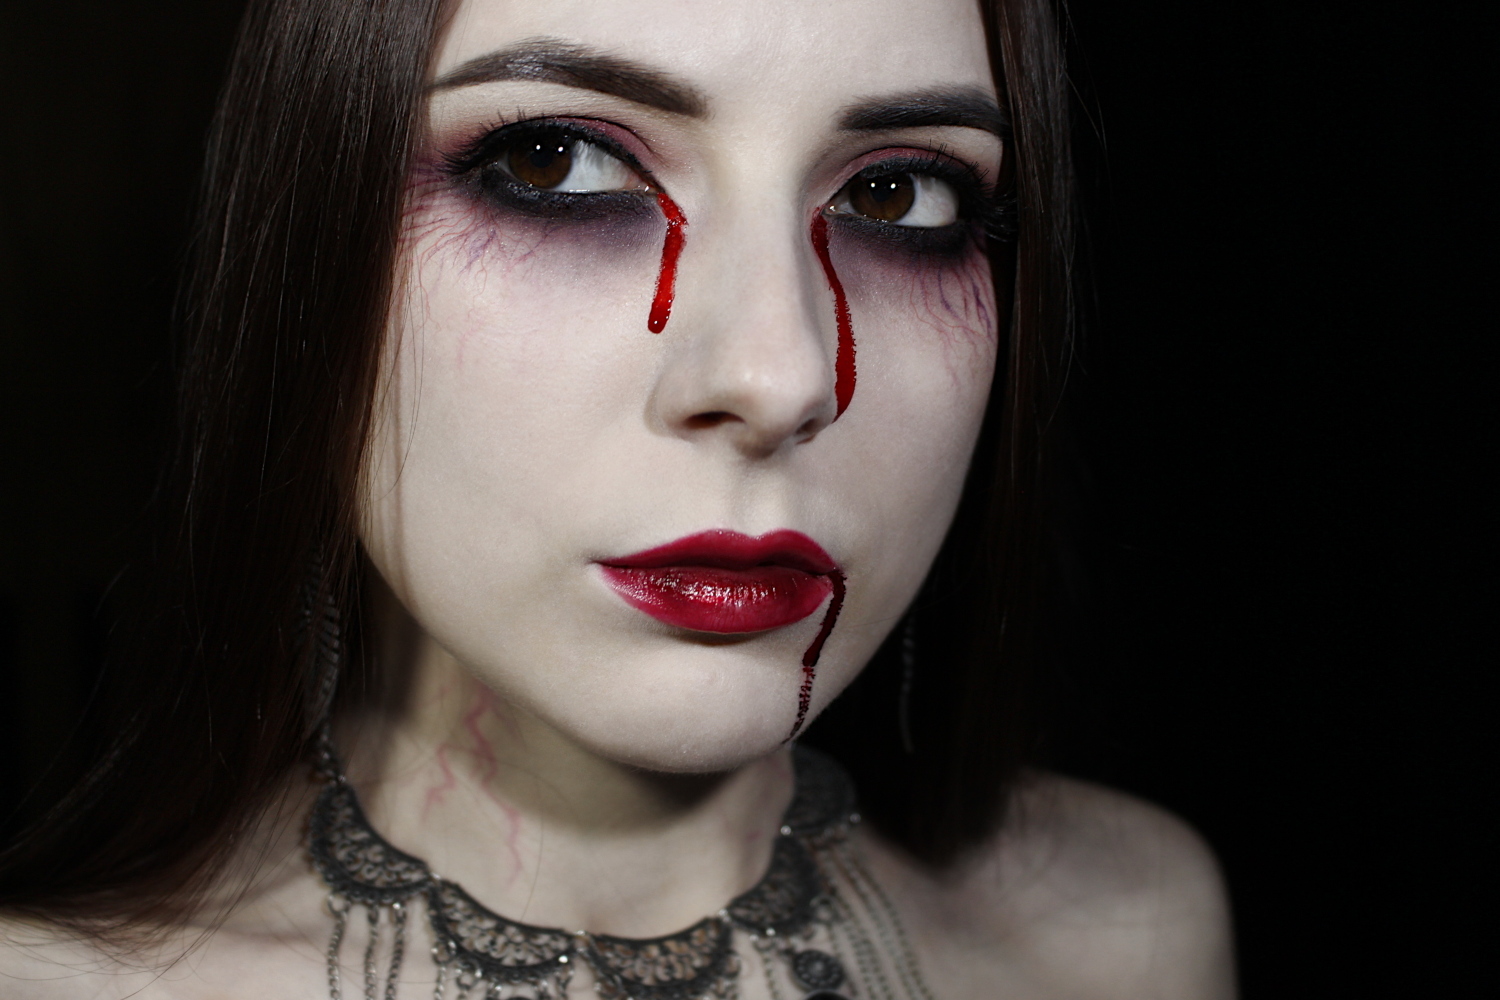 a close-up of Liz Breygel's face with a dramatic vampire makeup look and false blood tears for Halloween